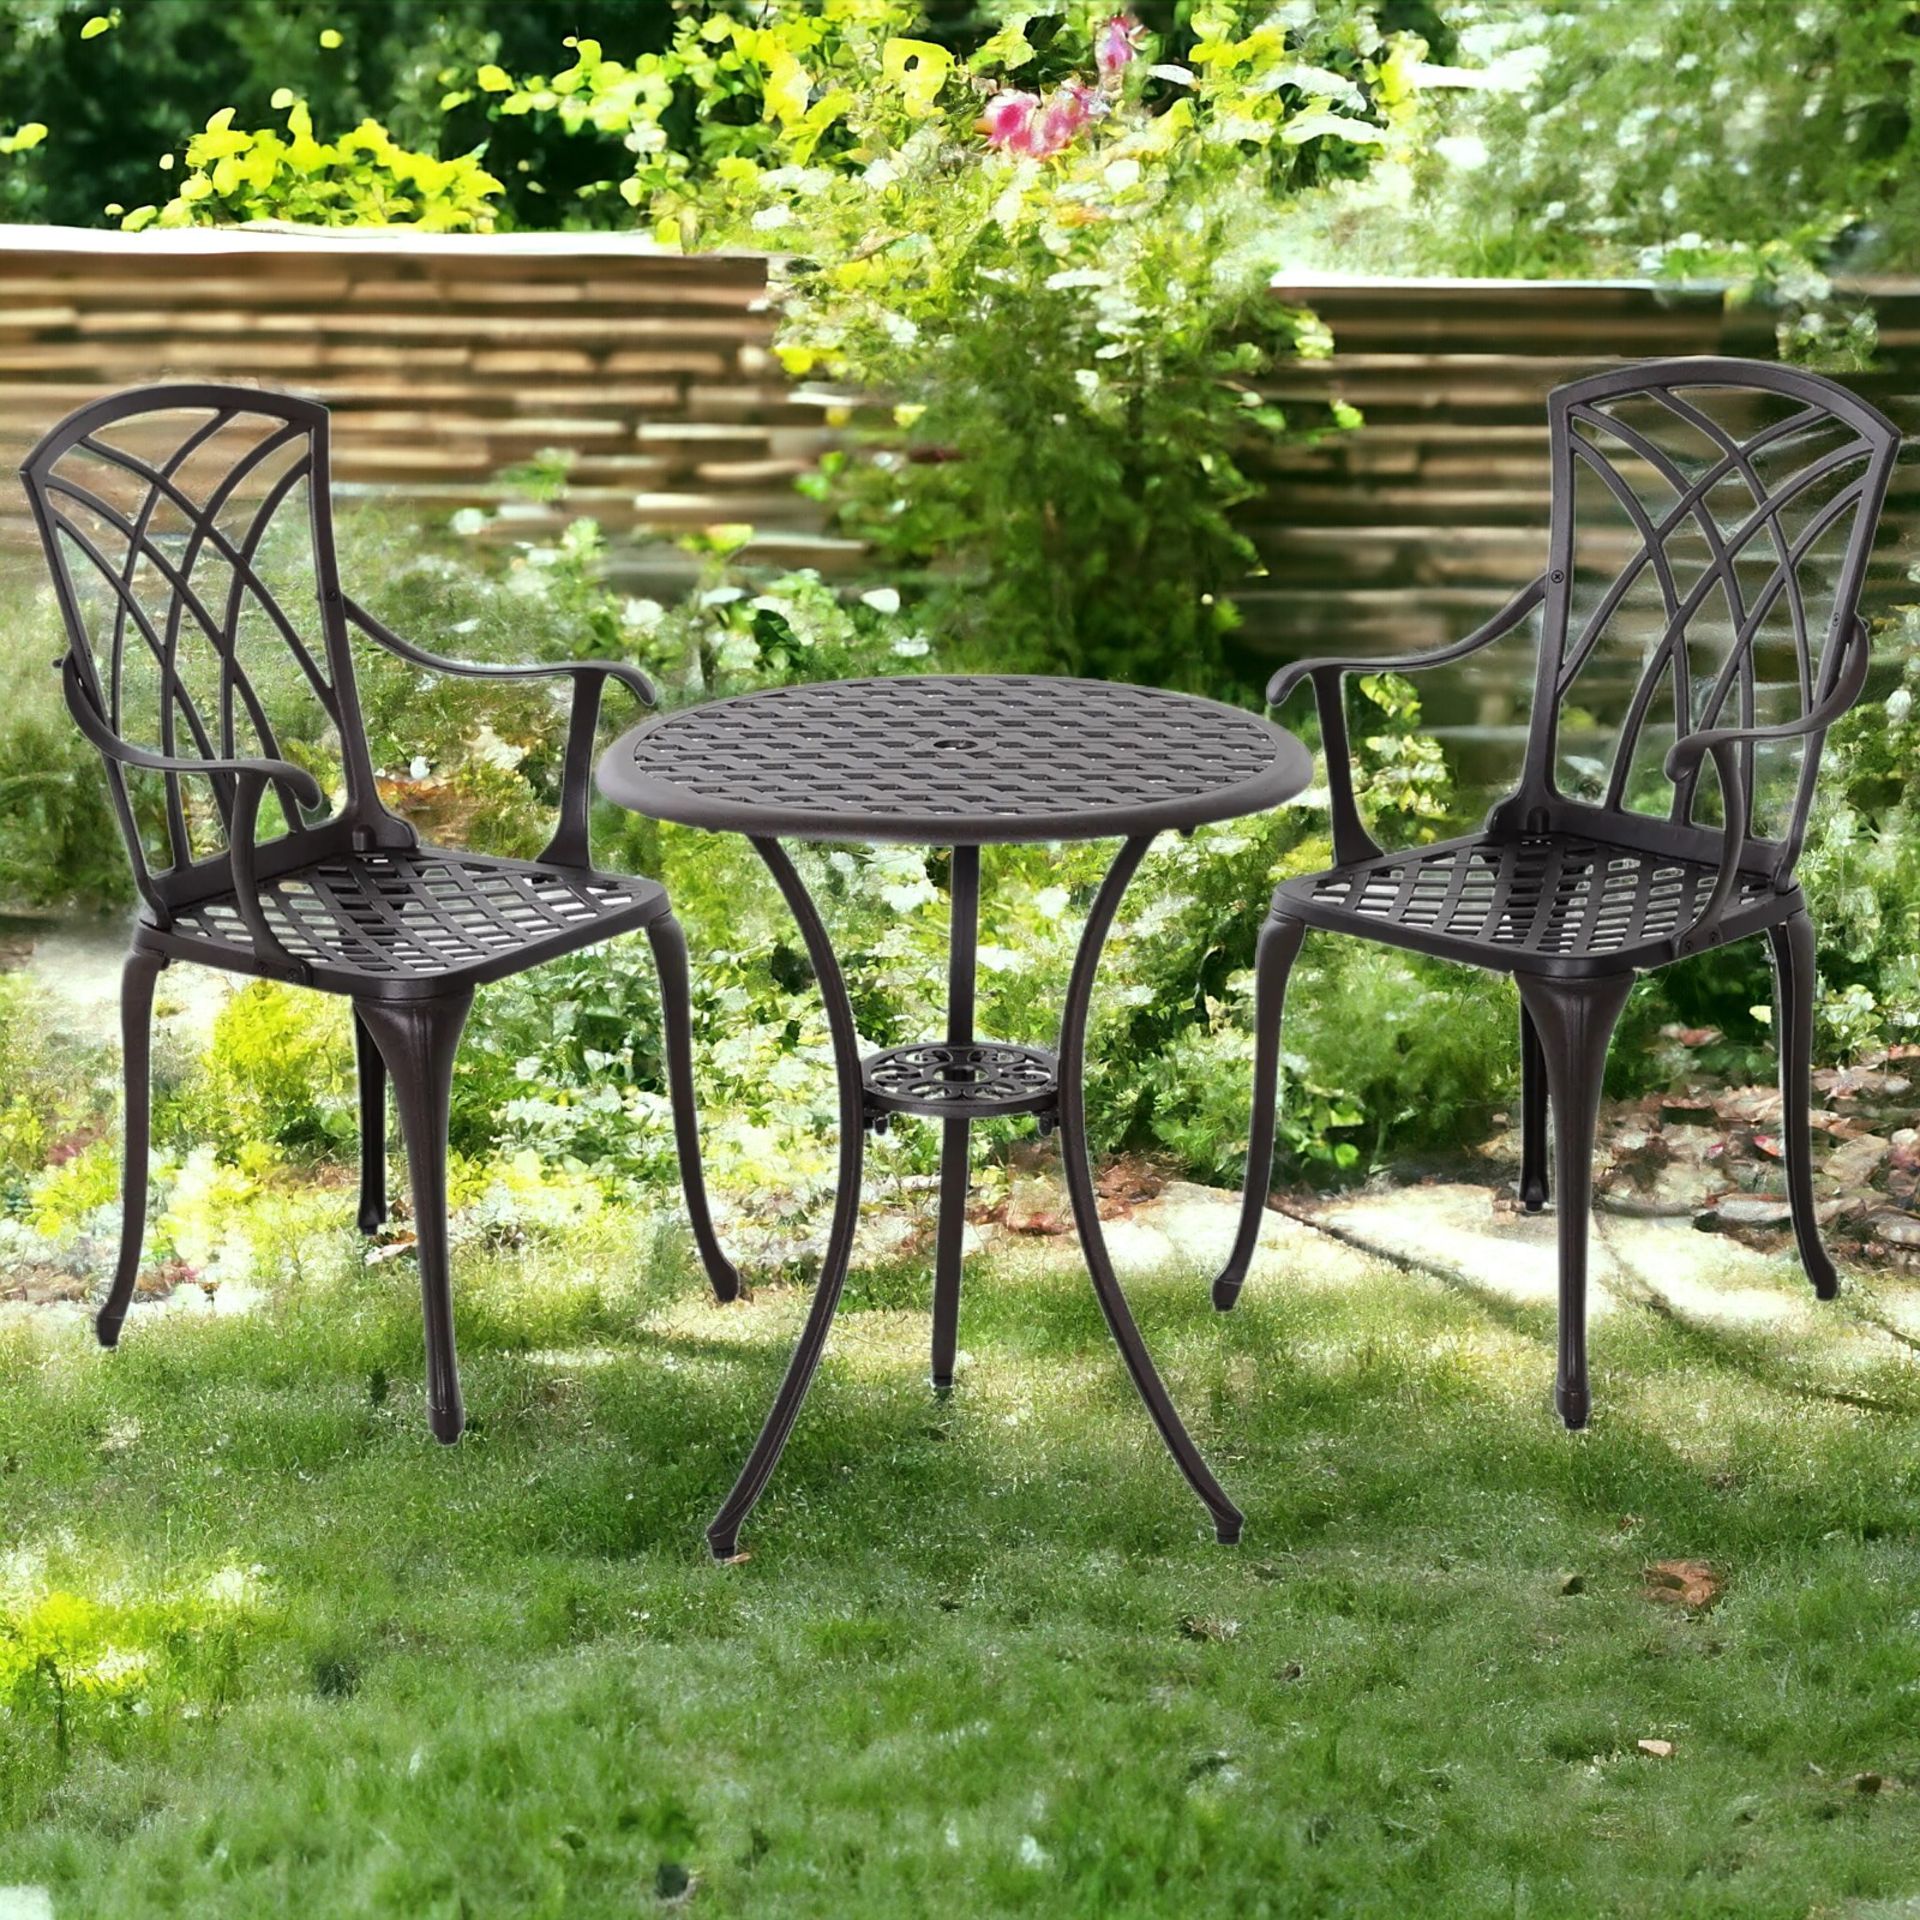 FREE DELIVERY - BRAND NEW 3 PCS COFFEE TABLE CHAIRS OUTDOOR GARDEN FURNITURE SET - Image 2 of 2